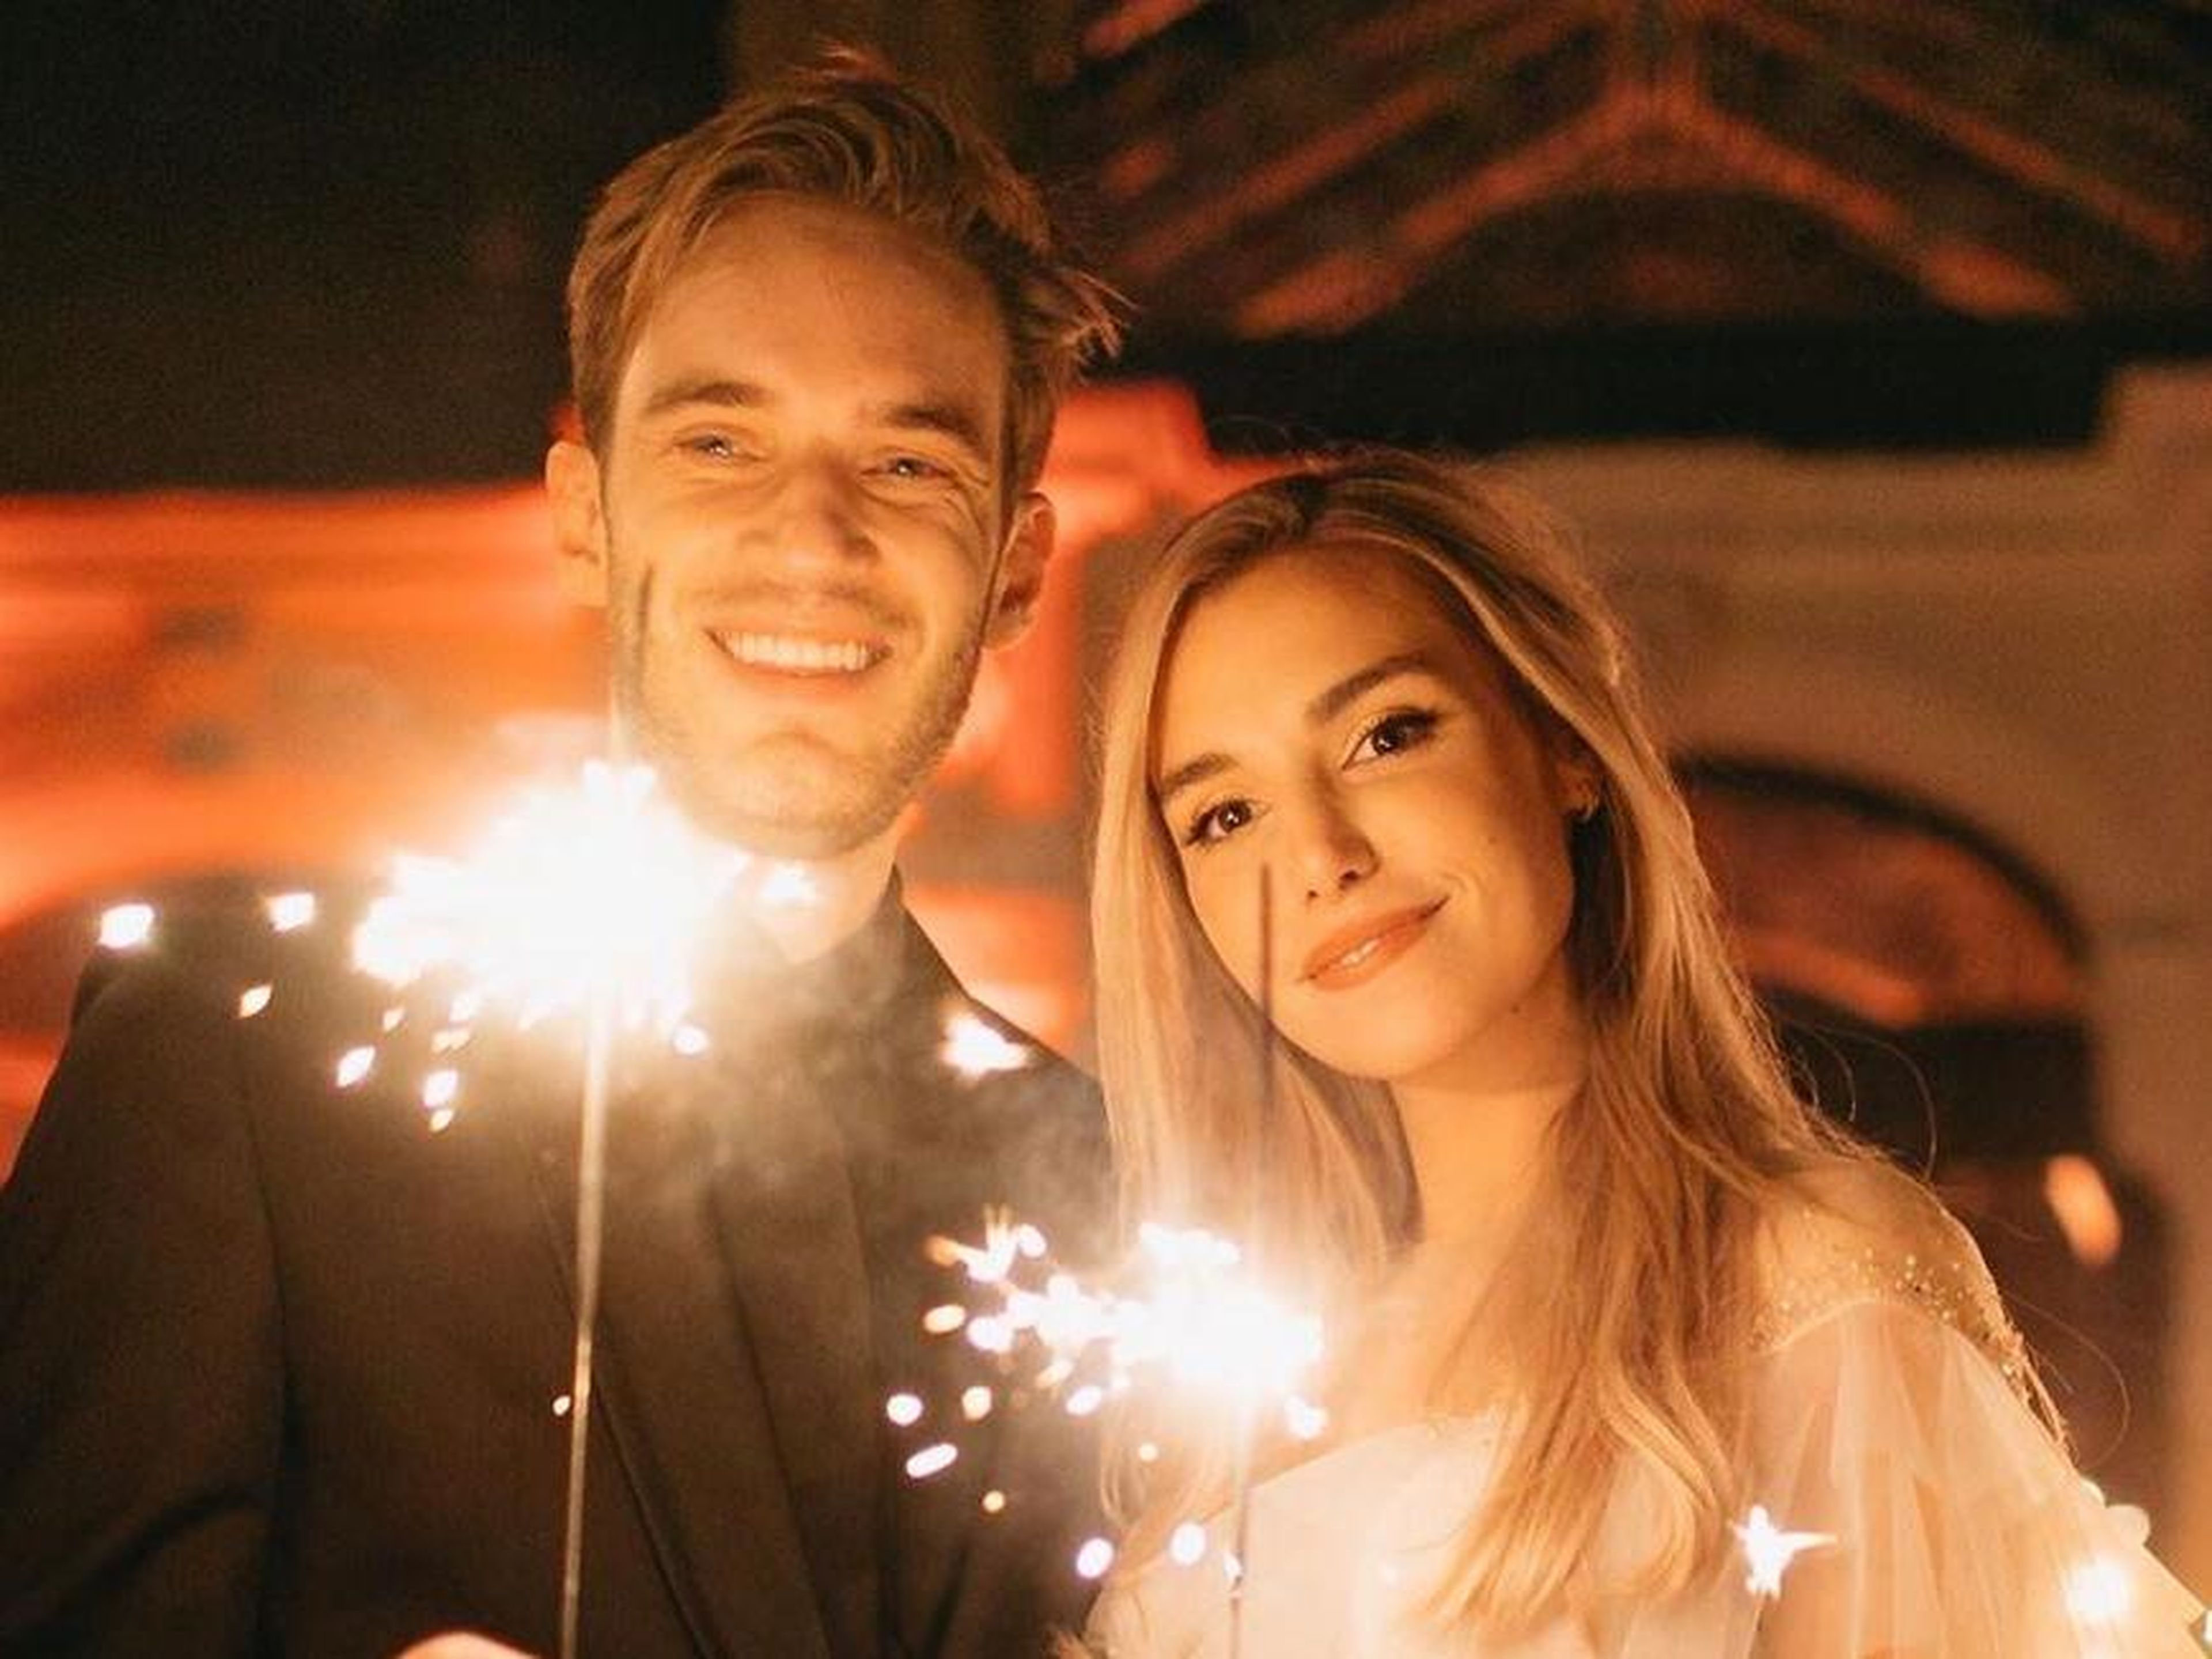 Just as he started to take off on YouTube, Kjellberg met his now wife, Marzia Bisognin. Bisognin reportedly emailed Kjellberg to tell him she found his videos funny, and the two have been together ever since. She started her own